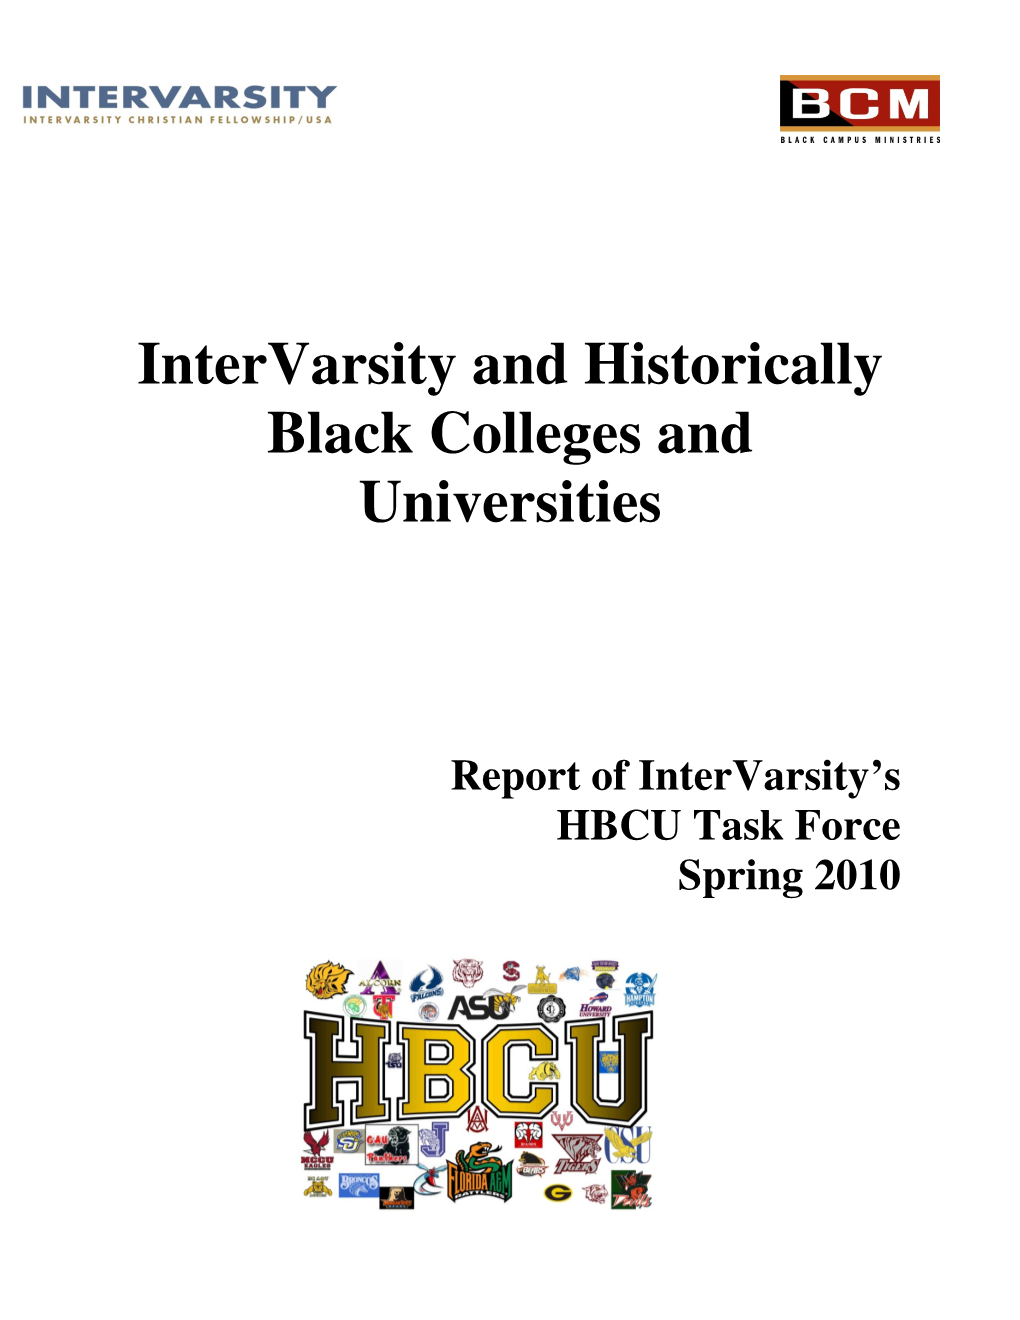 Intervarsity and Historically Black Colleges and Universities.Pdf